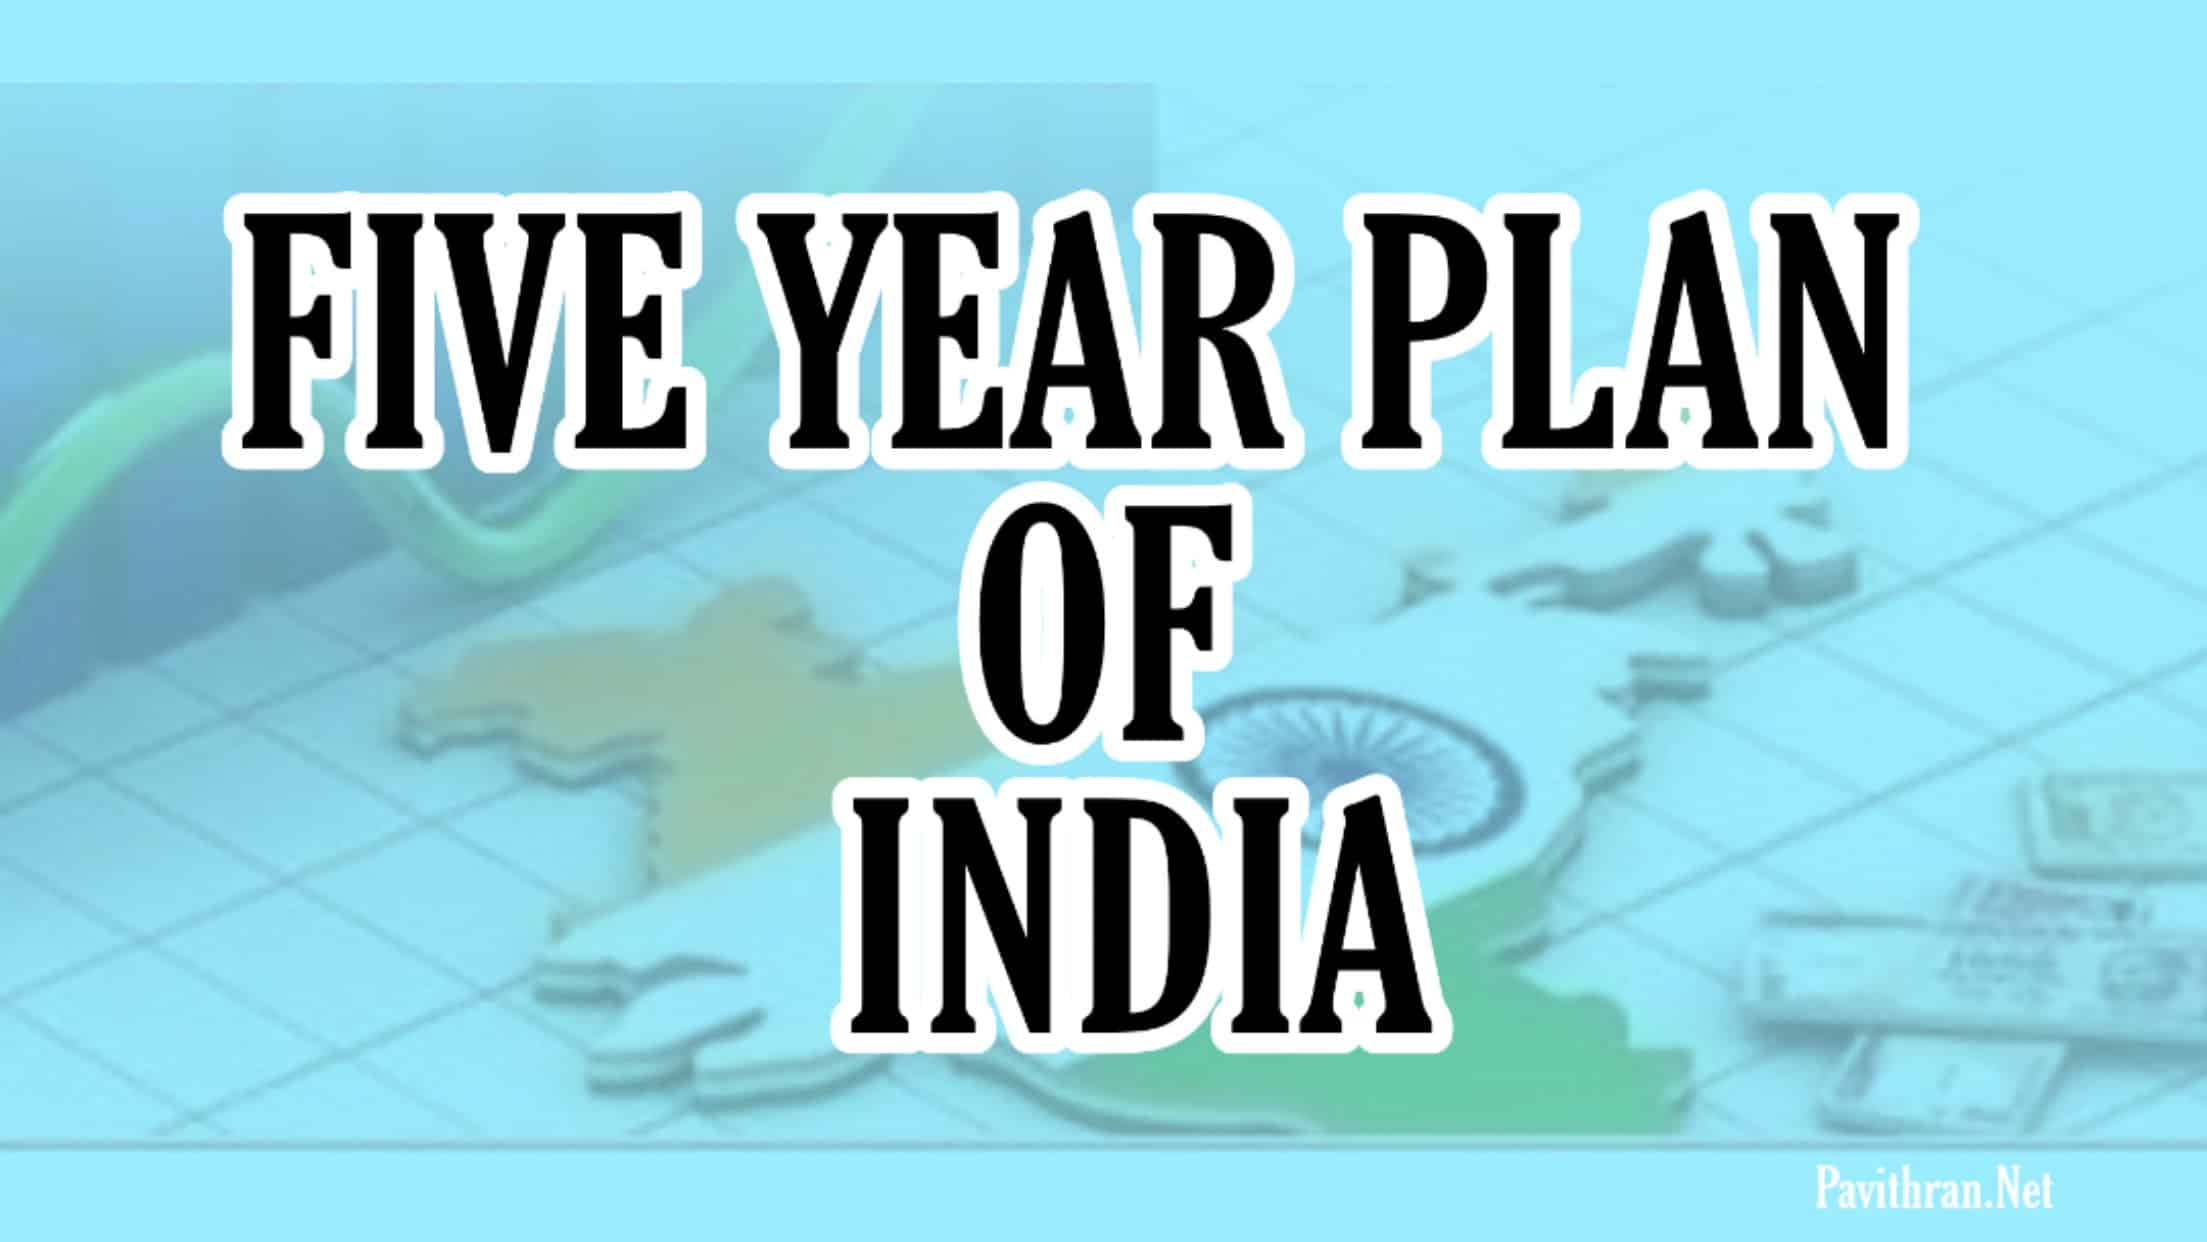 India's Five-Year Plans